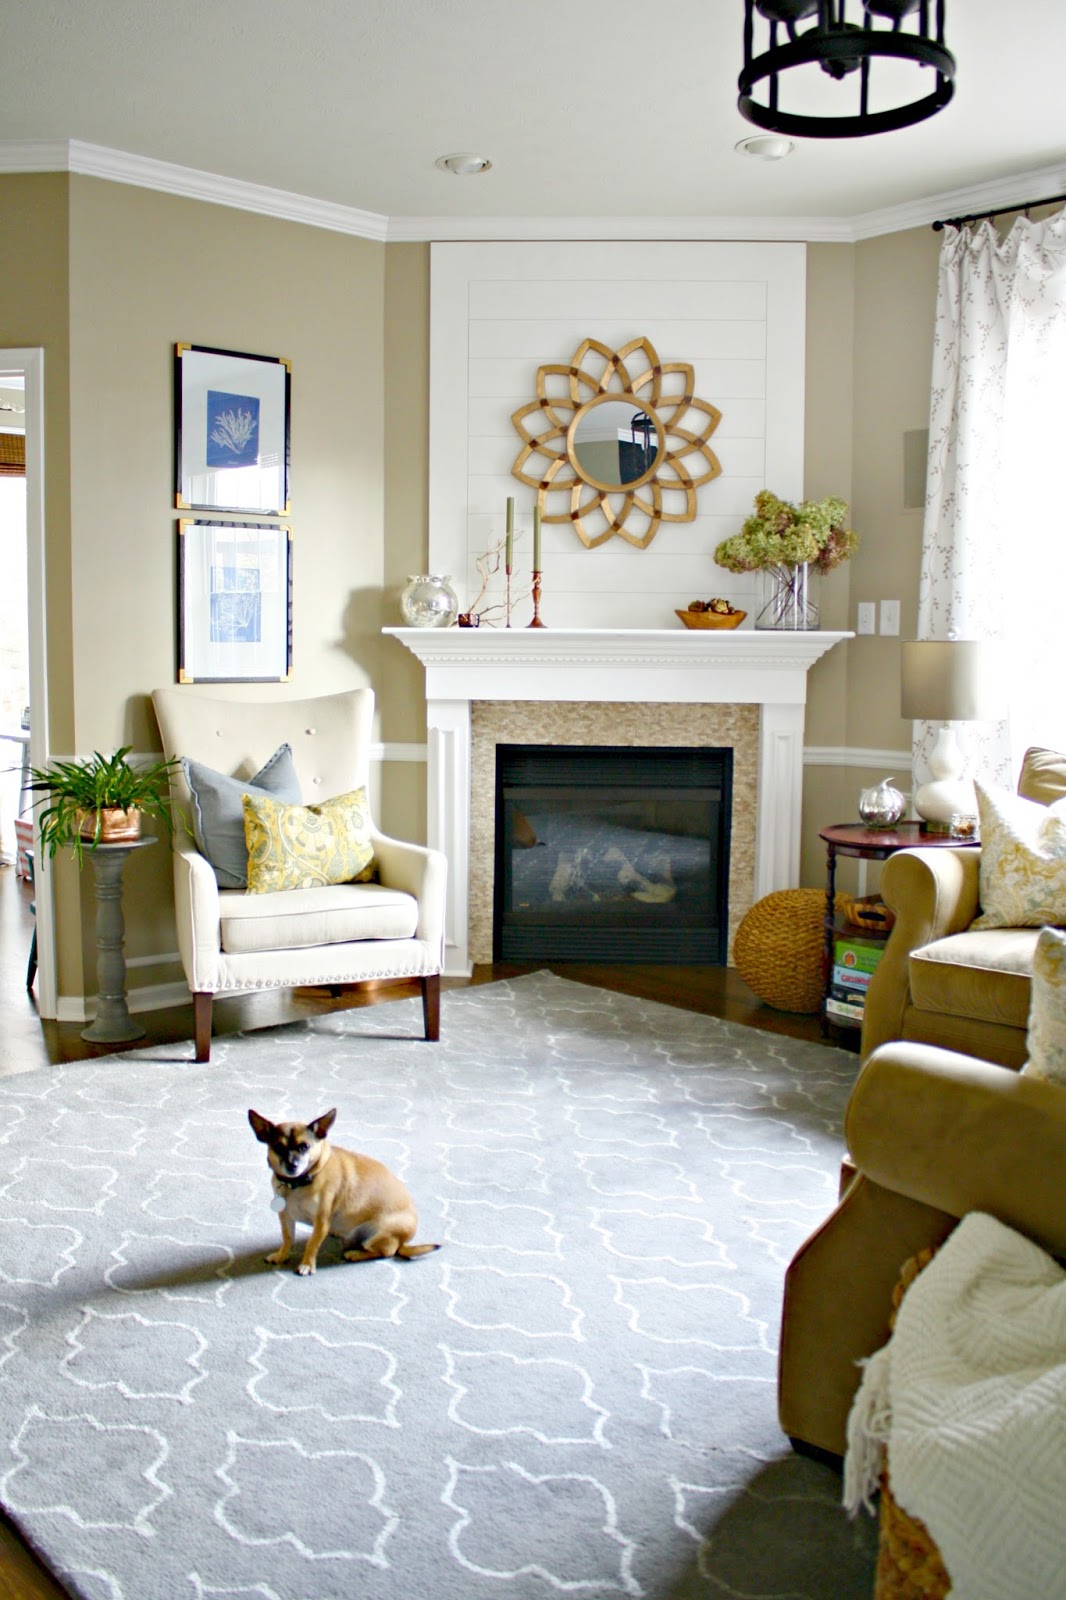 Our smartest and best renovation! from Thrifty Decor Chick